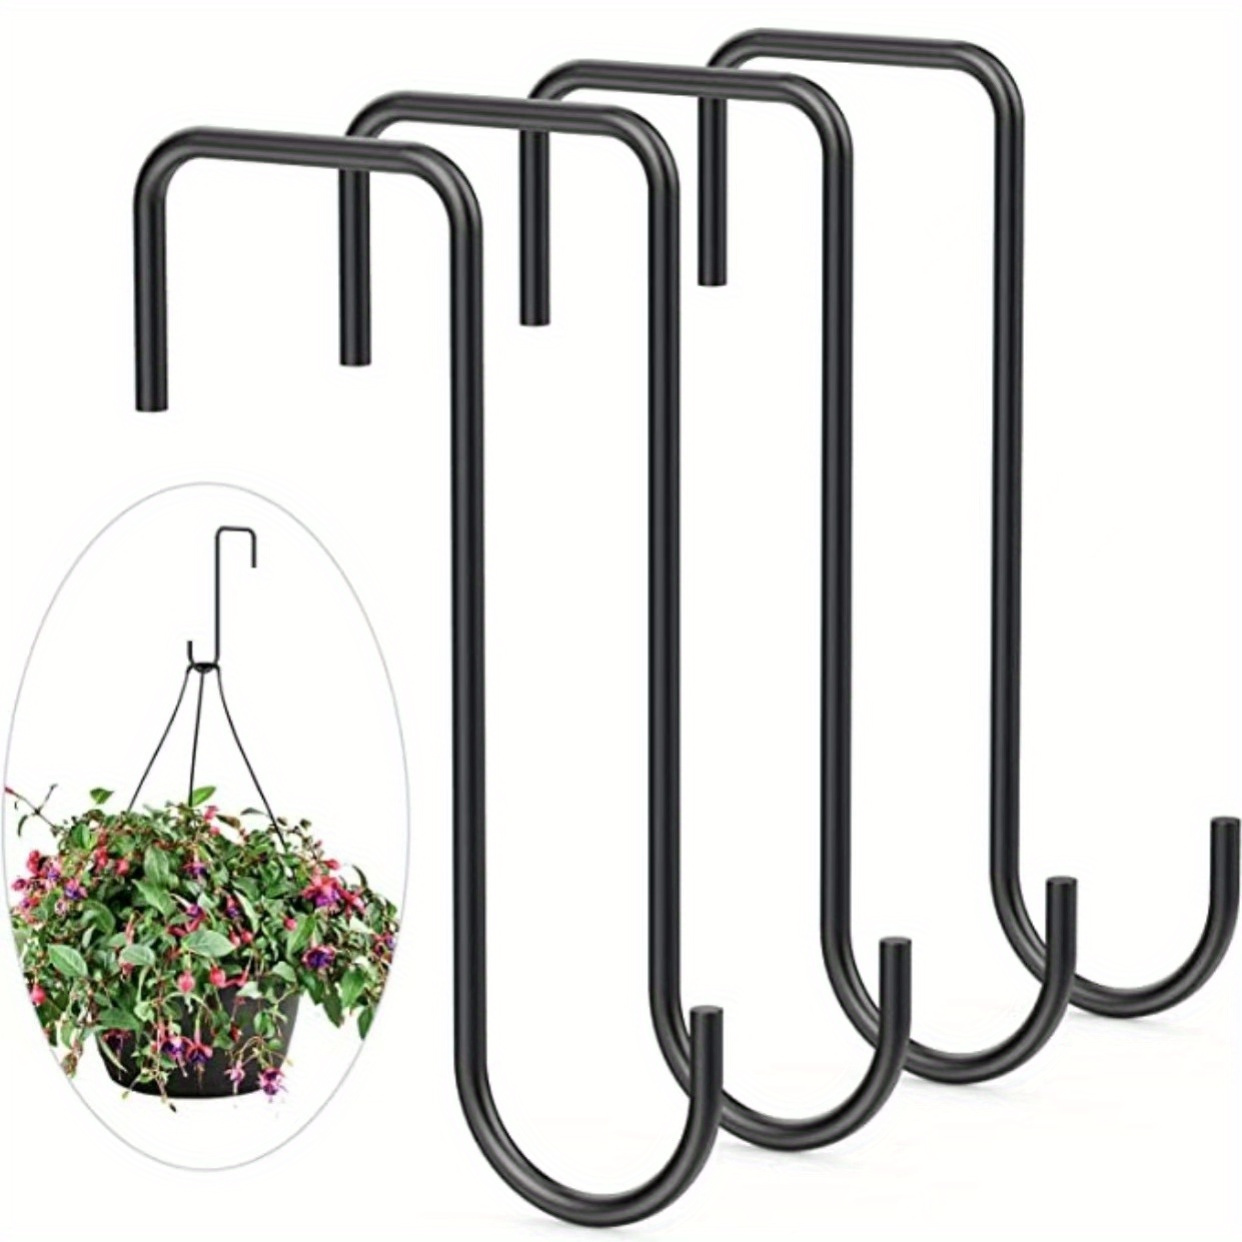 

2-piece Heavy Duty Stainless Steel Fence Hooks - Easy Install Over Door Plant Hangers For Indoor/outdoor Use, Perfect For Bird Feeders & Lanterns